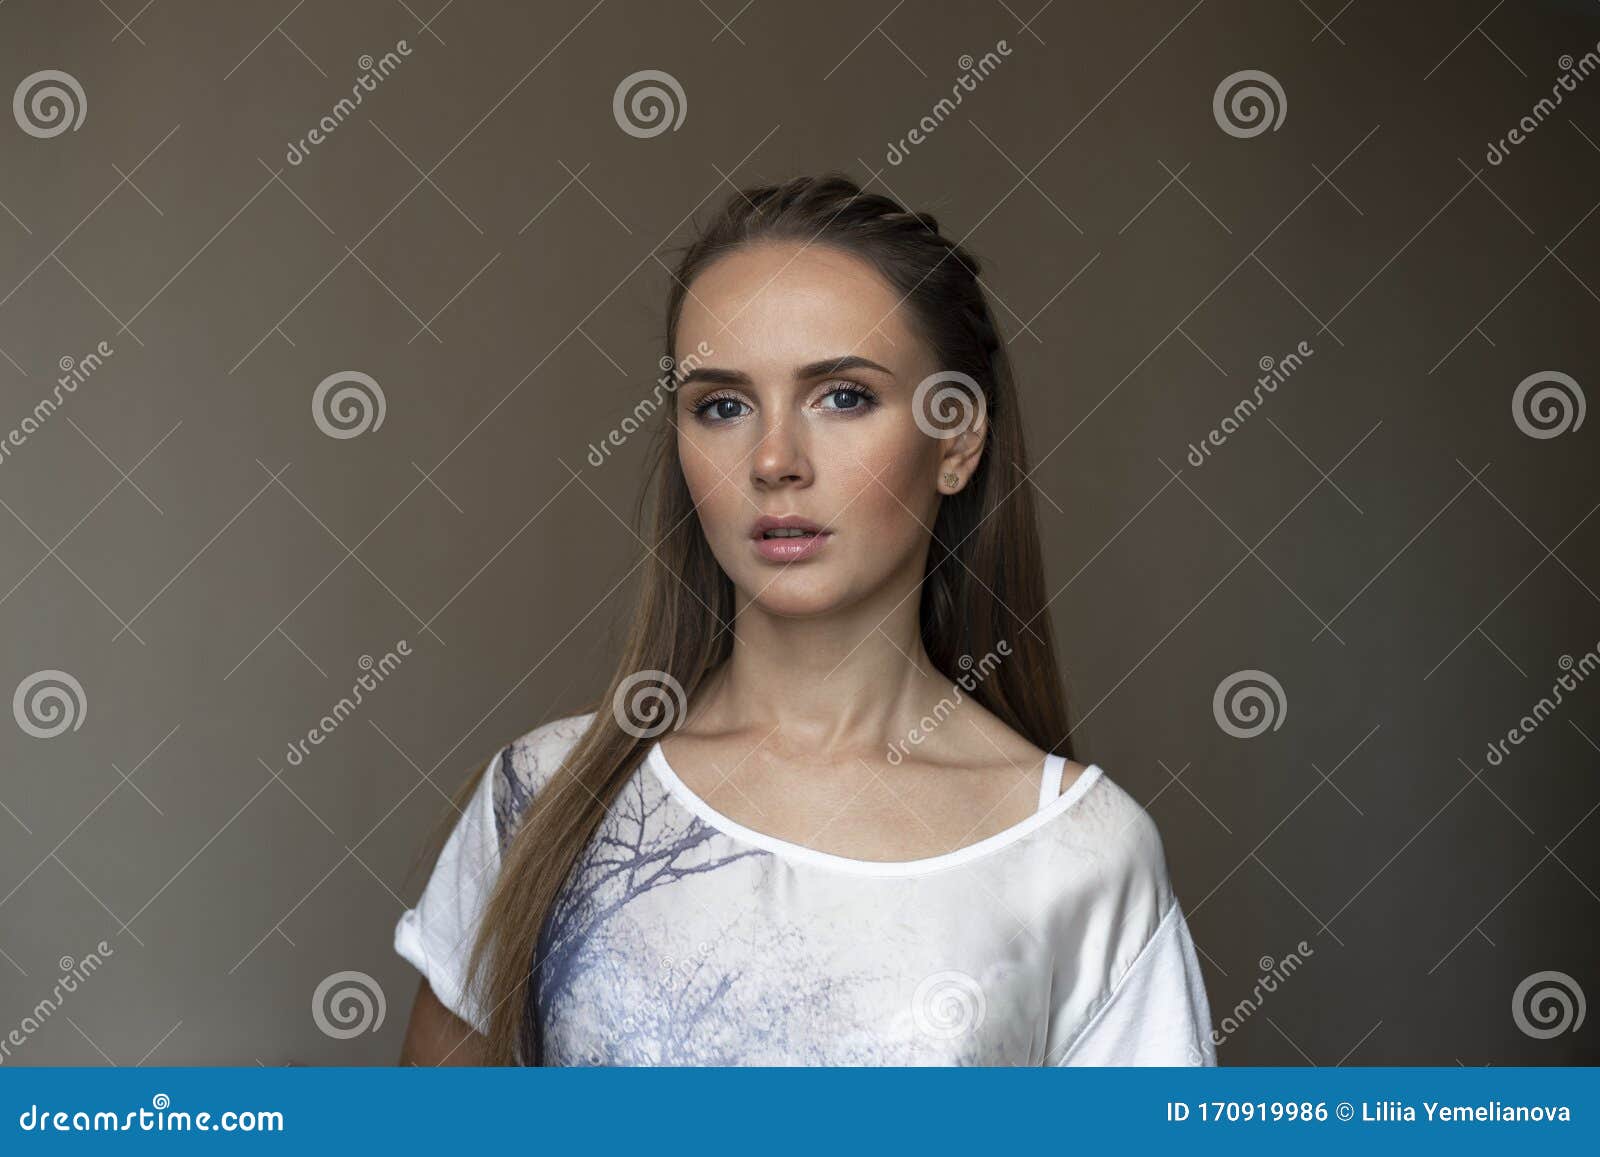 Beautiful Young Adult Woman with Strange Expression on Her Face pic